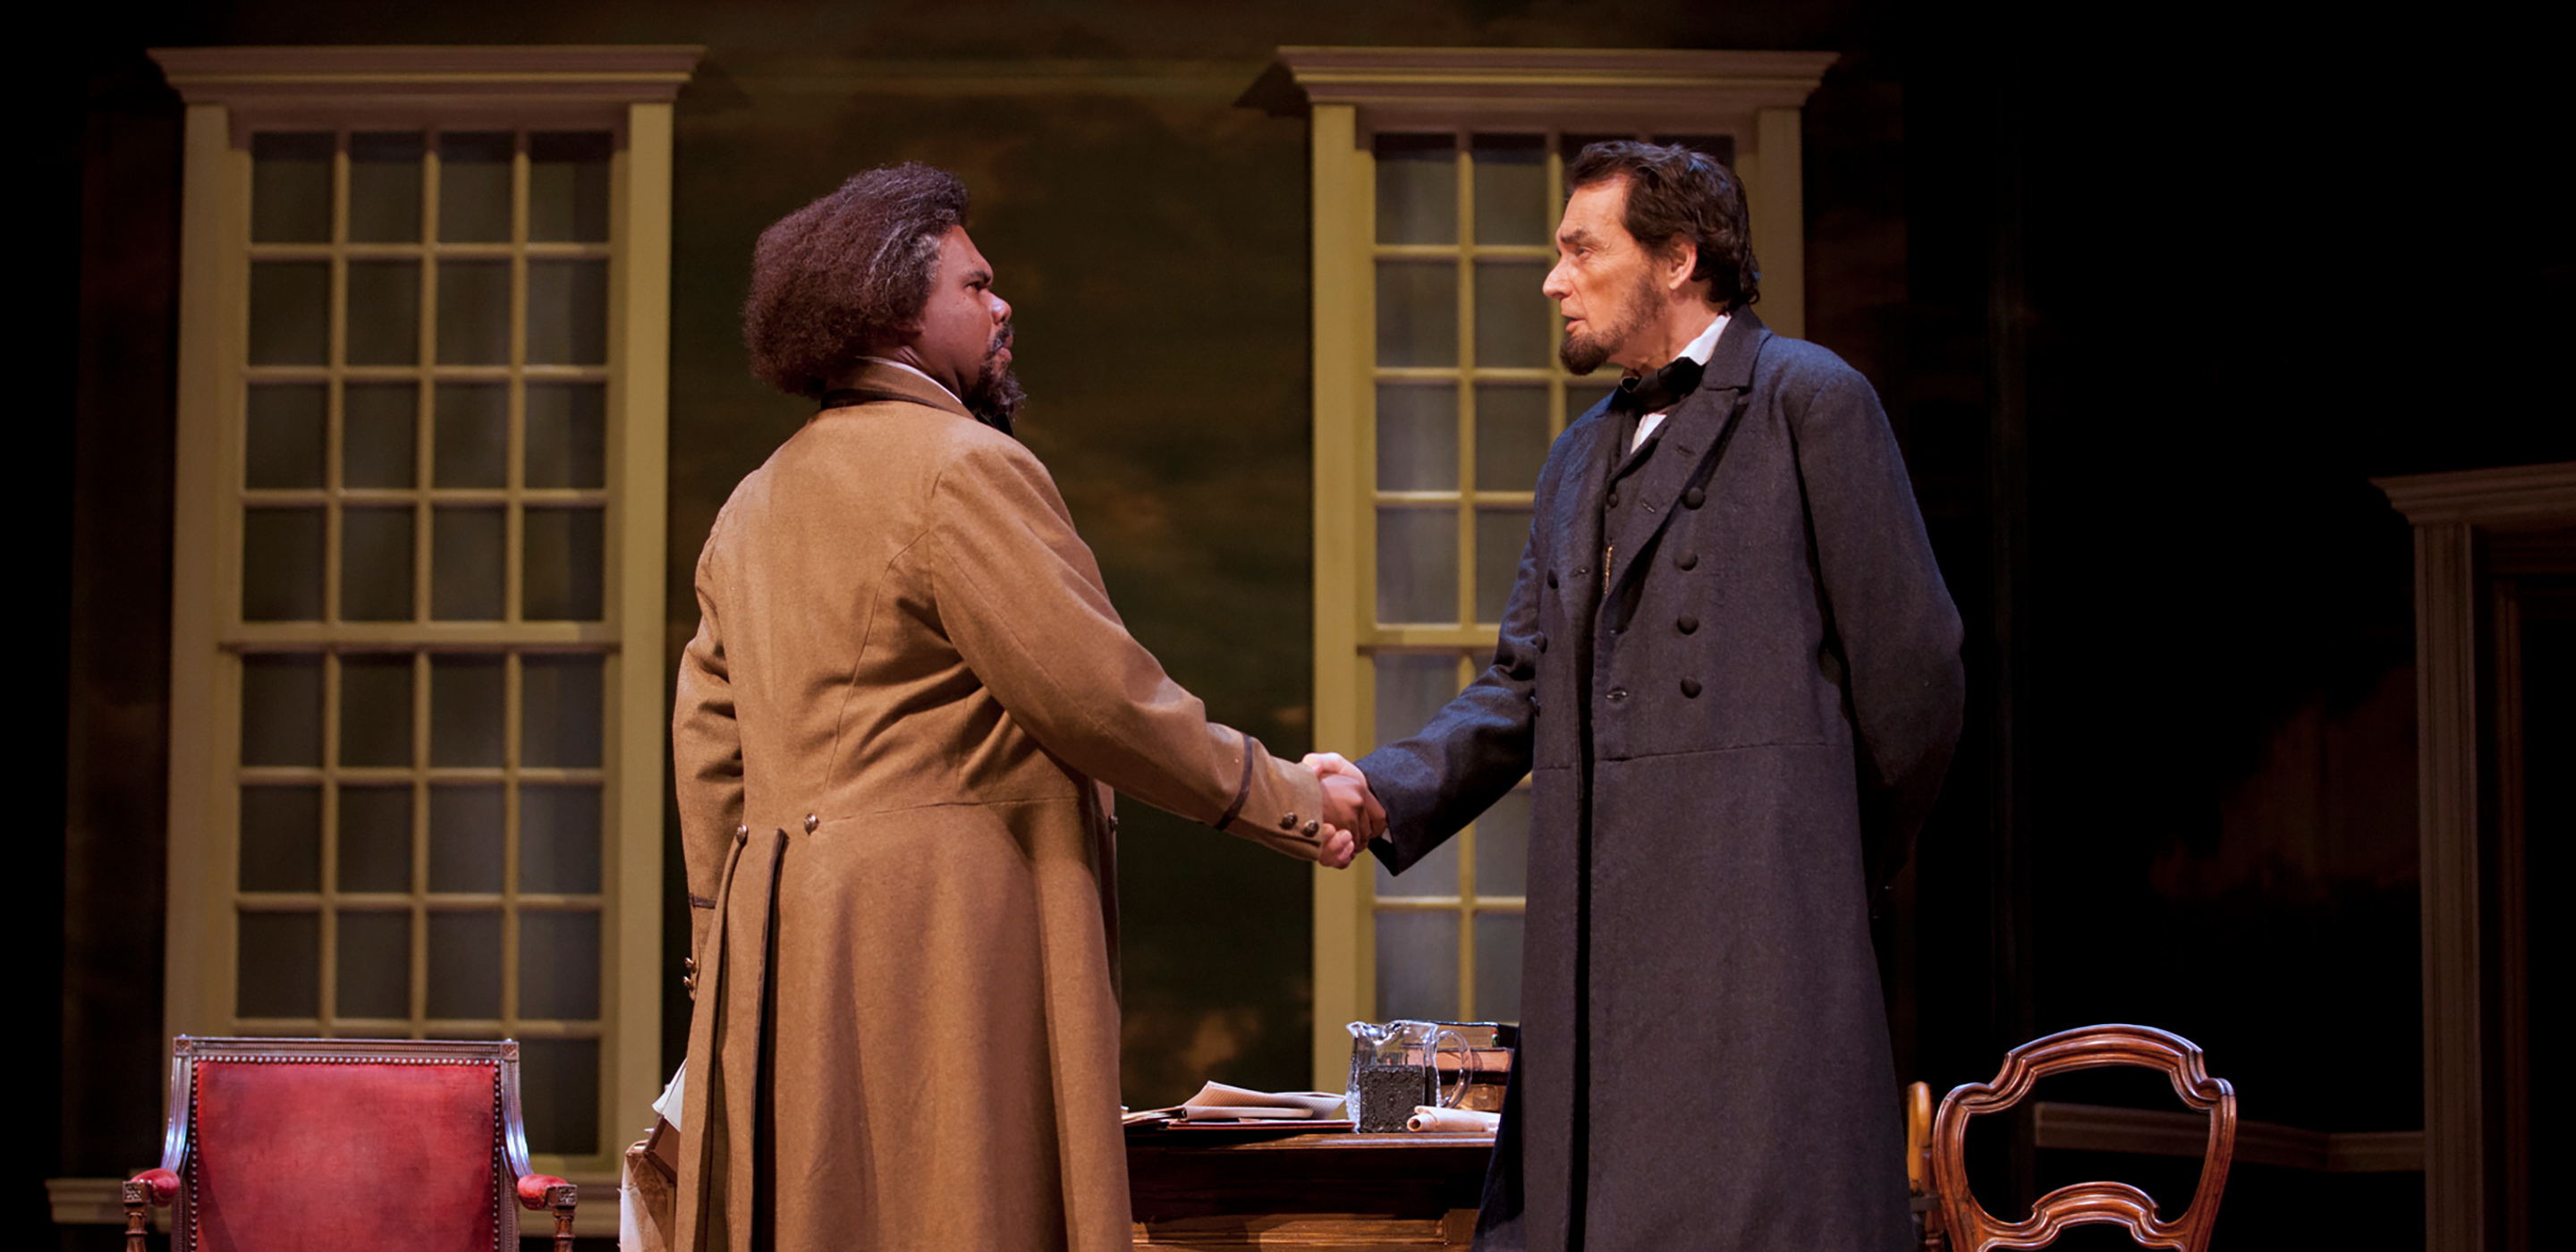 Actors portraying Frederick Douglass and Abraham Lincoln shake hands and talk while standing in front of a table and two closed windows.